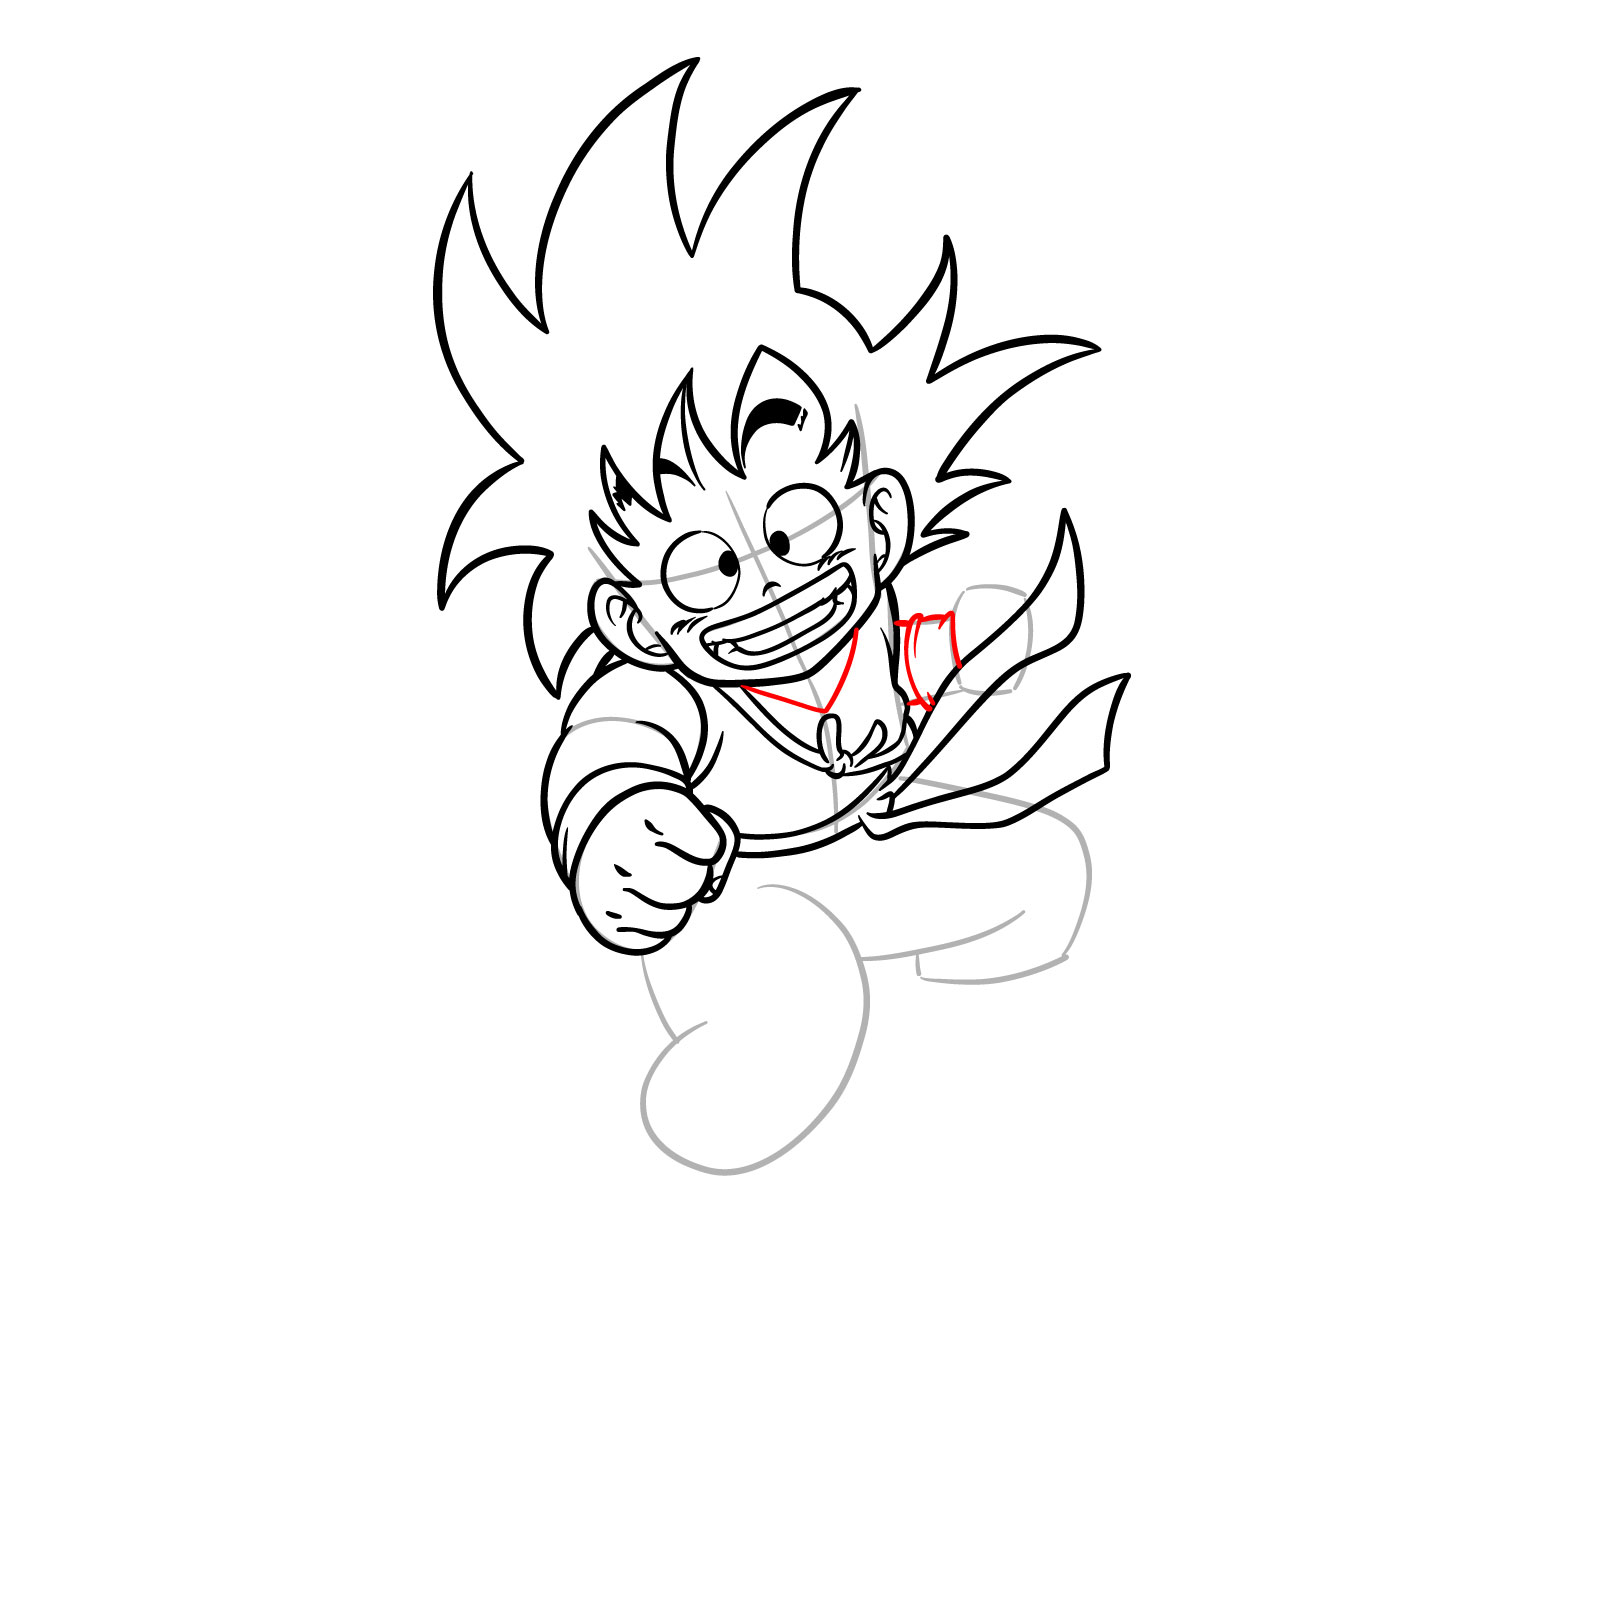 How to draw Kid Goku riding on the Flying Nimbus - step 17